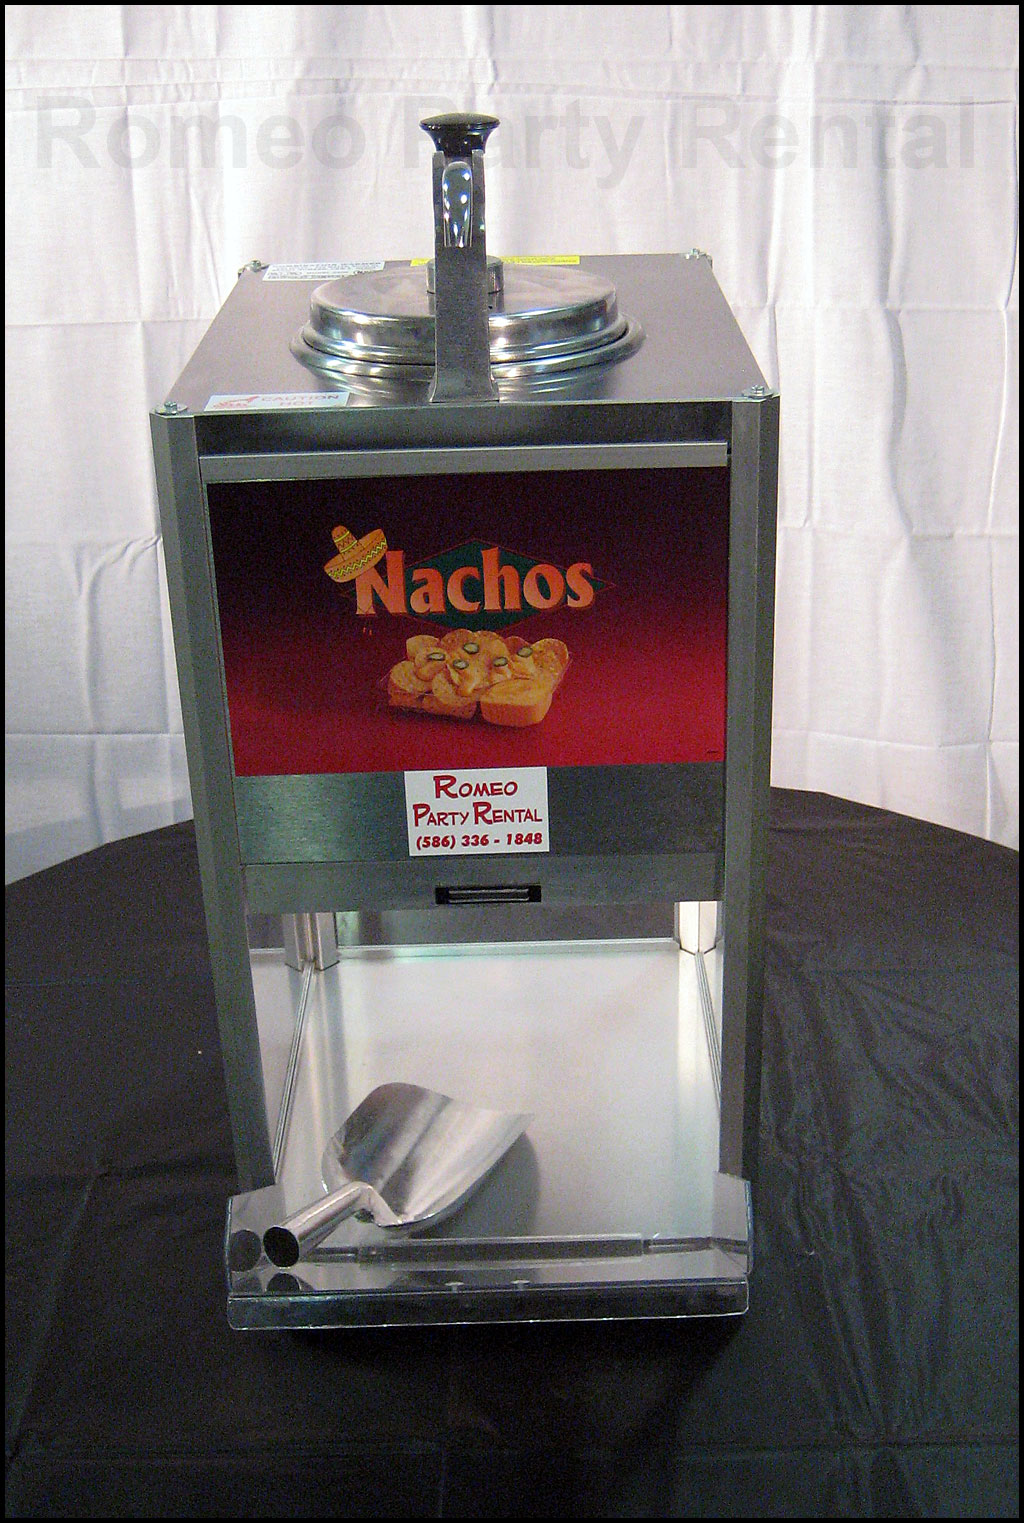 https://romeopartyrental.com/wp-content/uploads/2021/05/Nacho-Cheese-Warmer-with-Ch.jpg